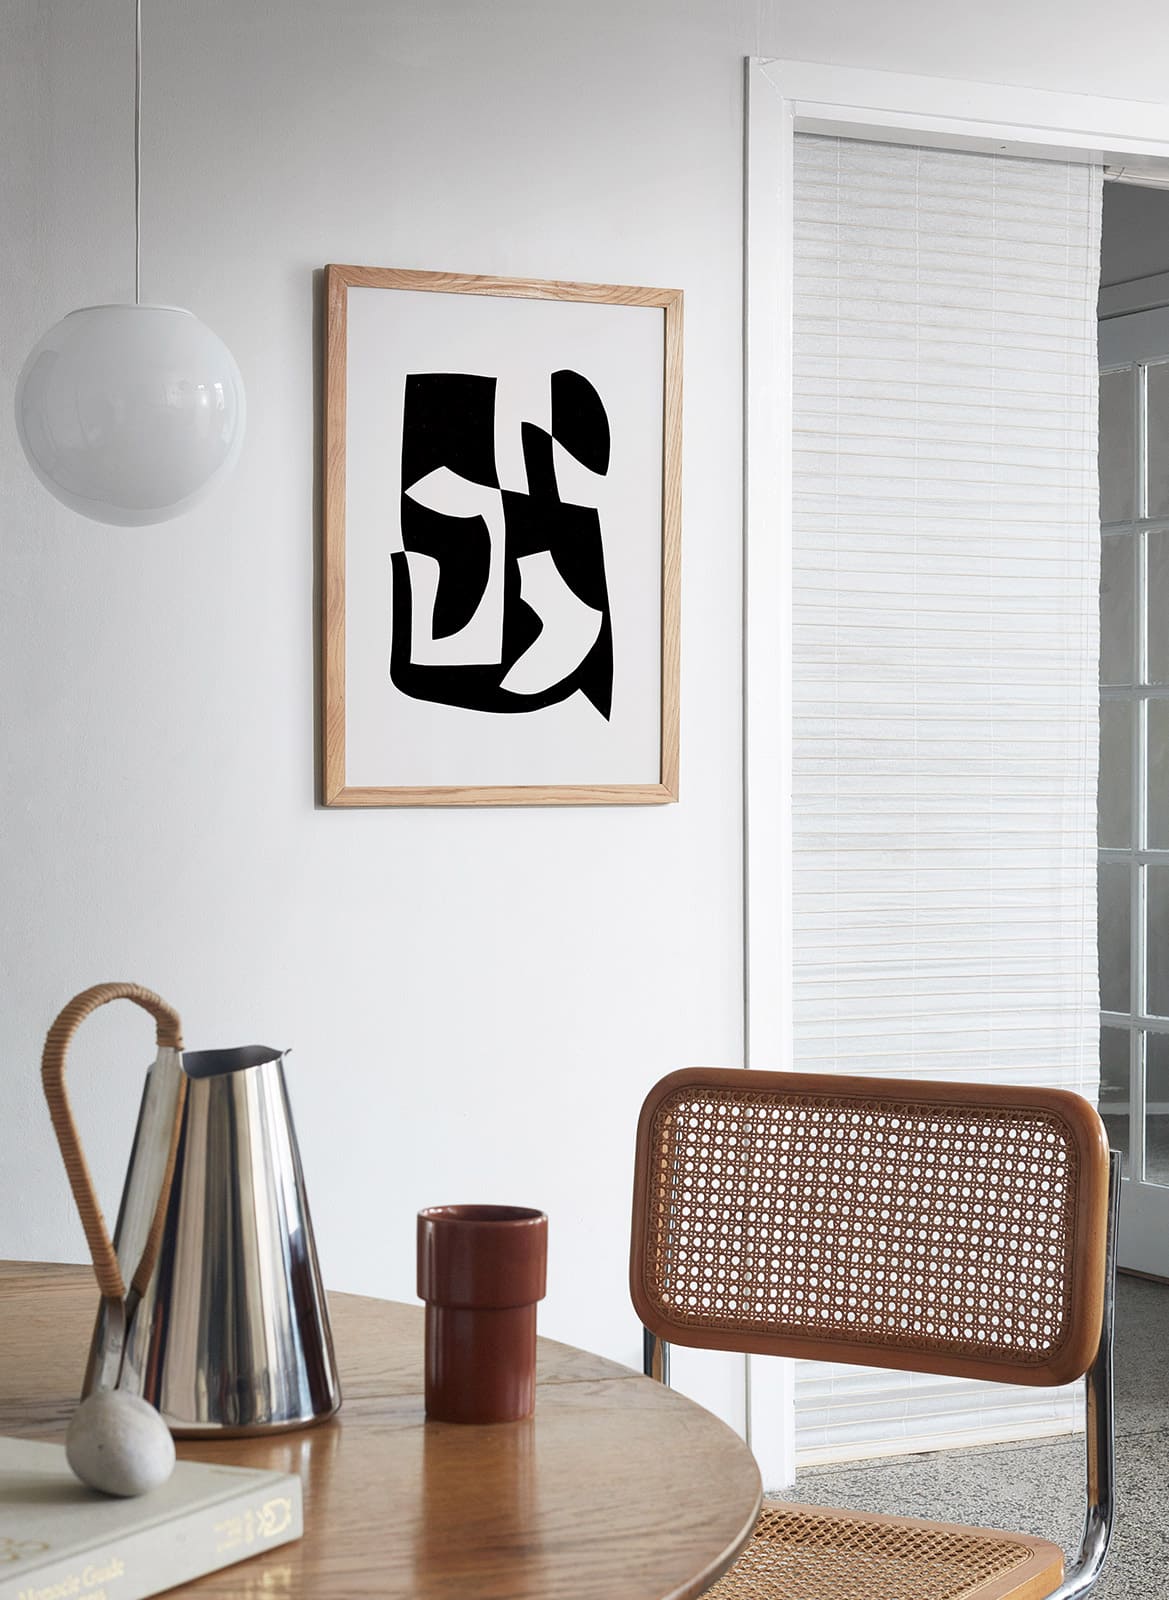  Framed black and white poster hanging above dining table by Atelier Cph